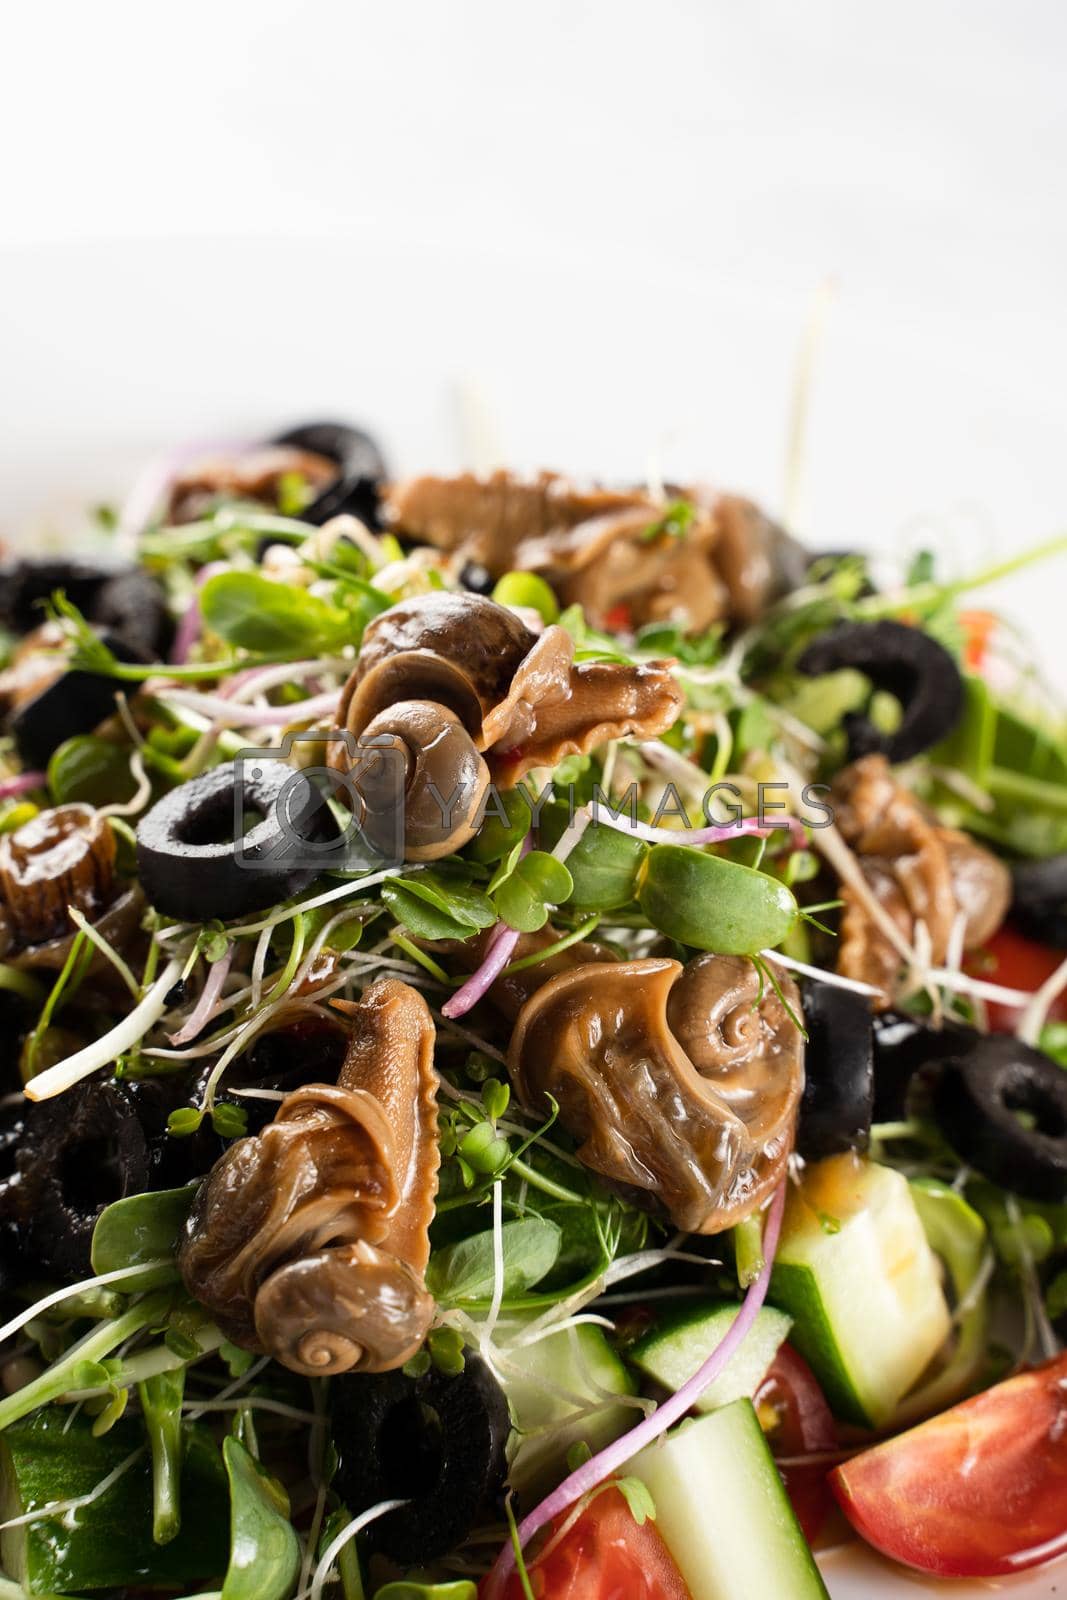 Royalty free image of Salad with snail, olive, tomatoe cherie, cucumber and greens by Rabizo